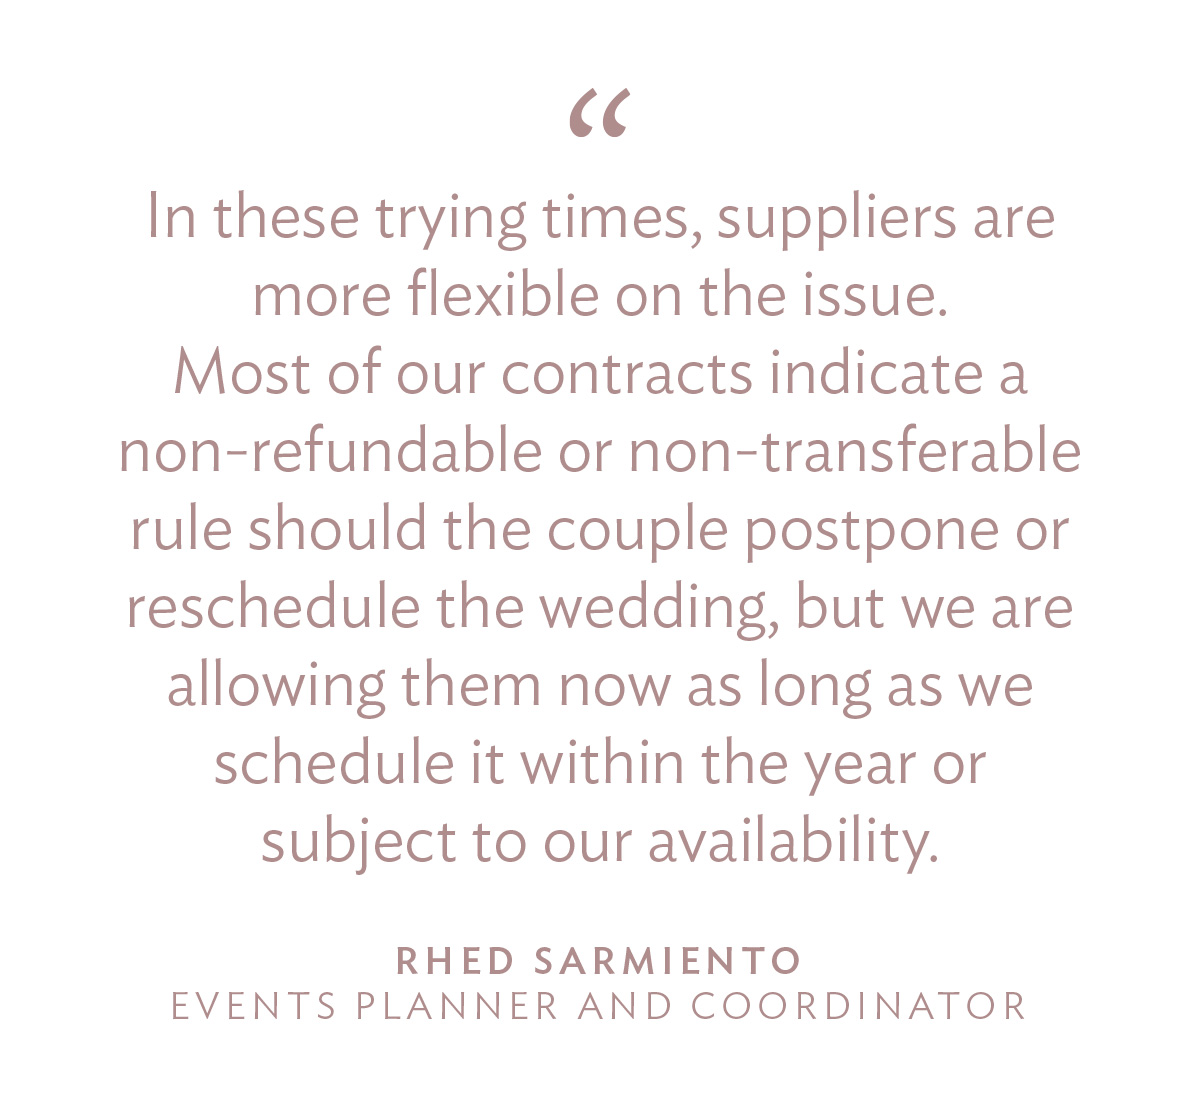 “In these trying times, suppliers are more flexible on the issue. Most of our contracts indicate a non-refundable or non-transferable rule should the couple postpone or reschedule the wedding, but we are allowing them now as long as we schedule it within the year or subject to our availability.” - Rhed Sarmiento, Events Planner and Coordinator